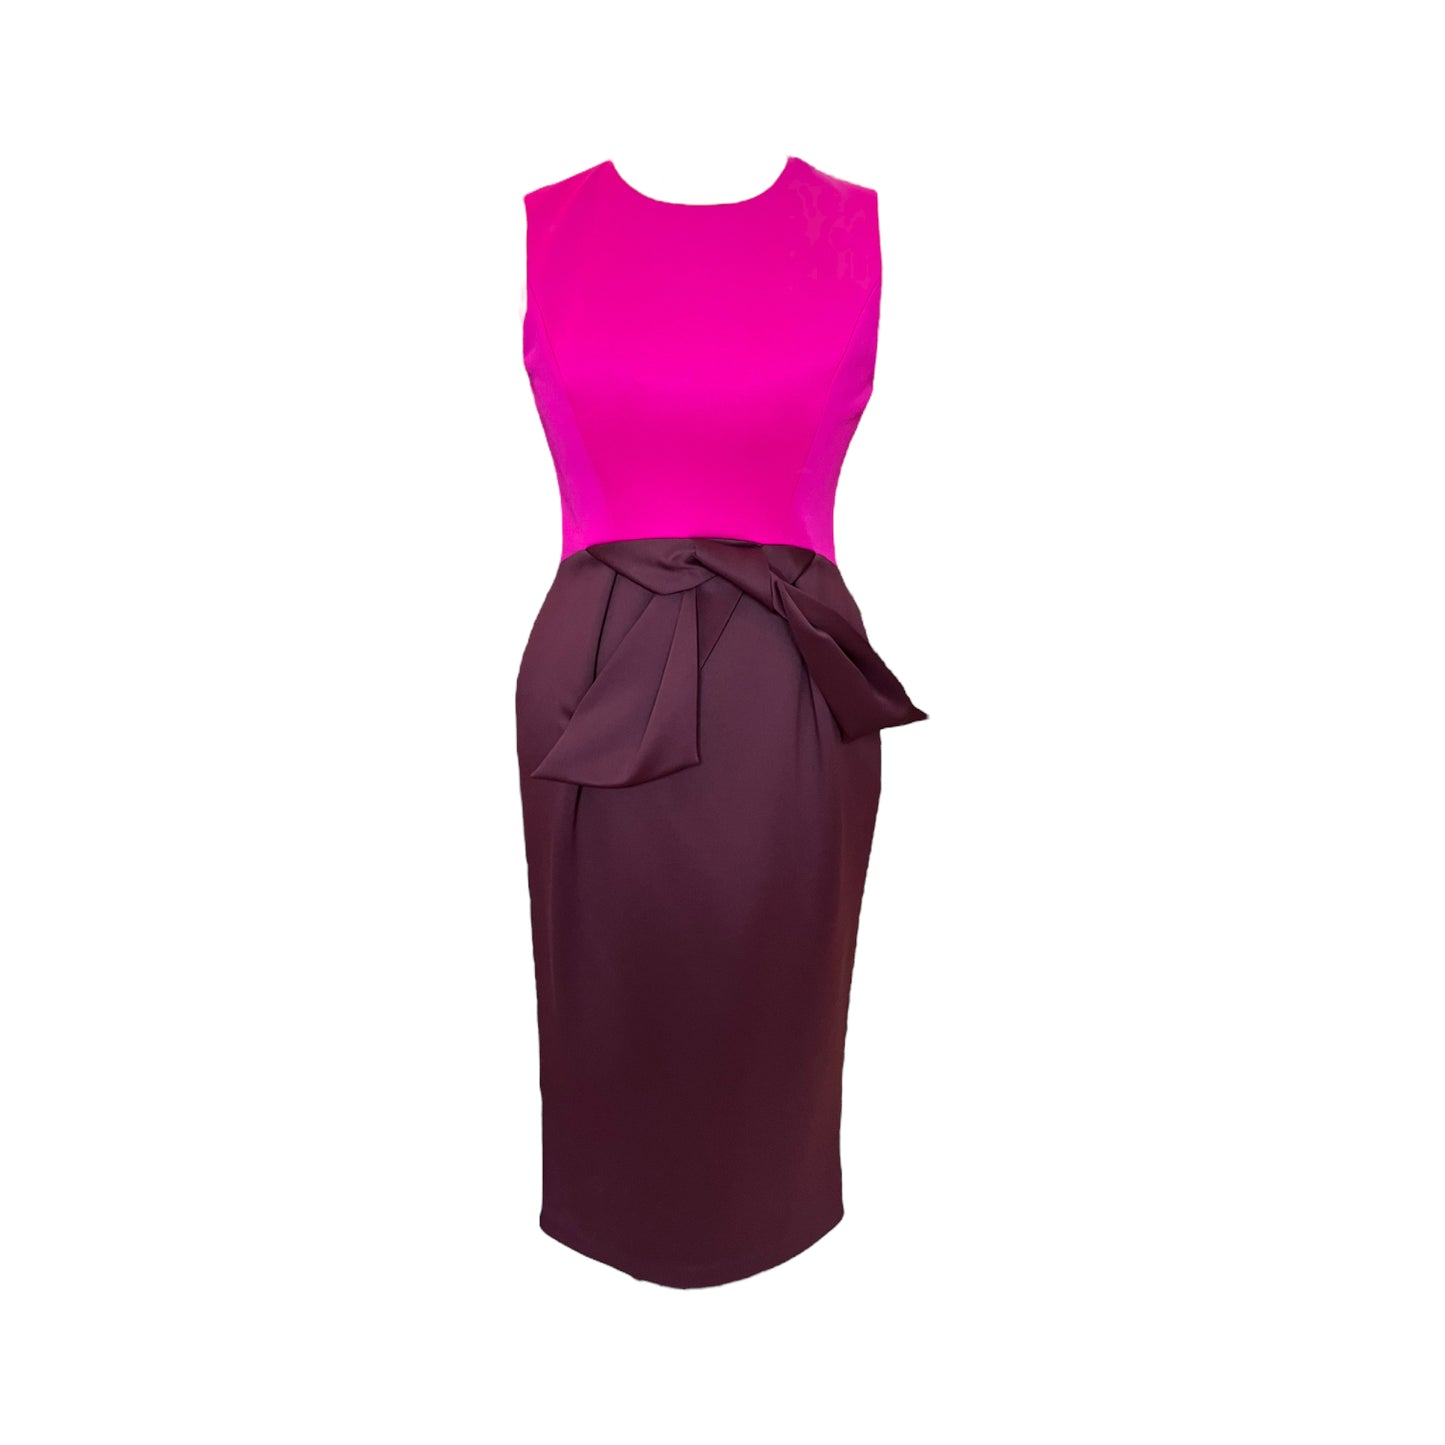 NEW Ted Baker Pink and Maroon Dress